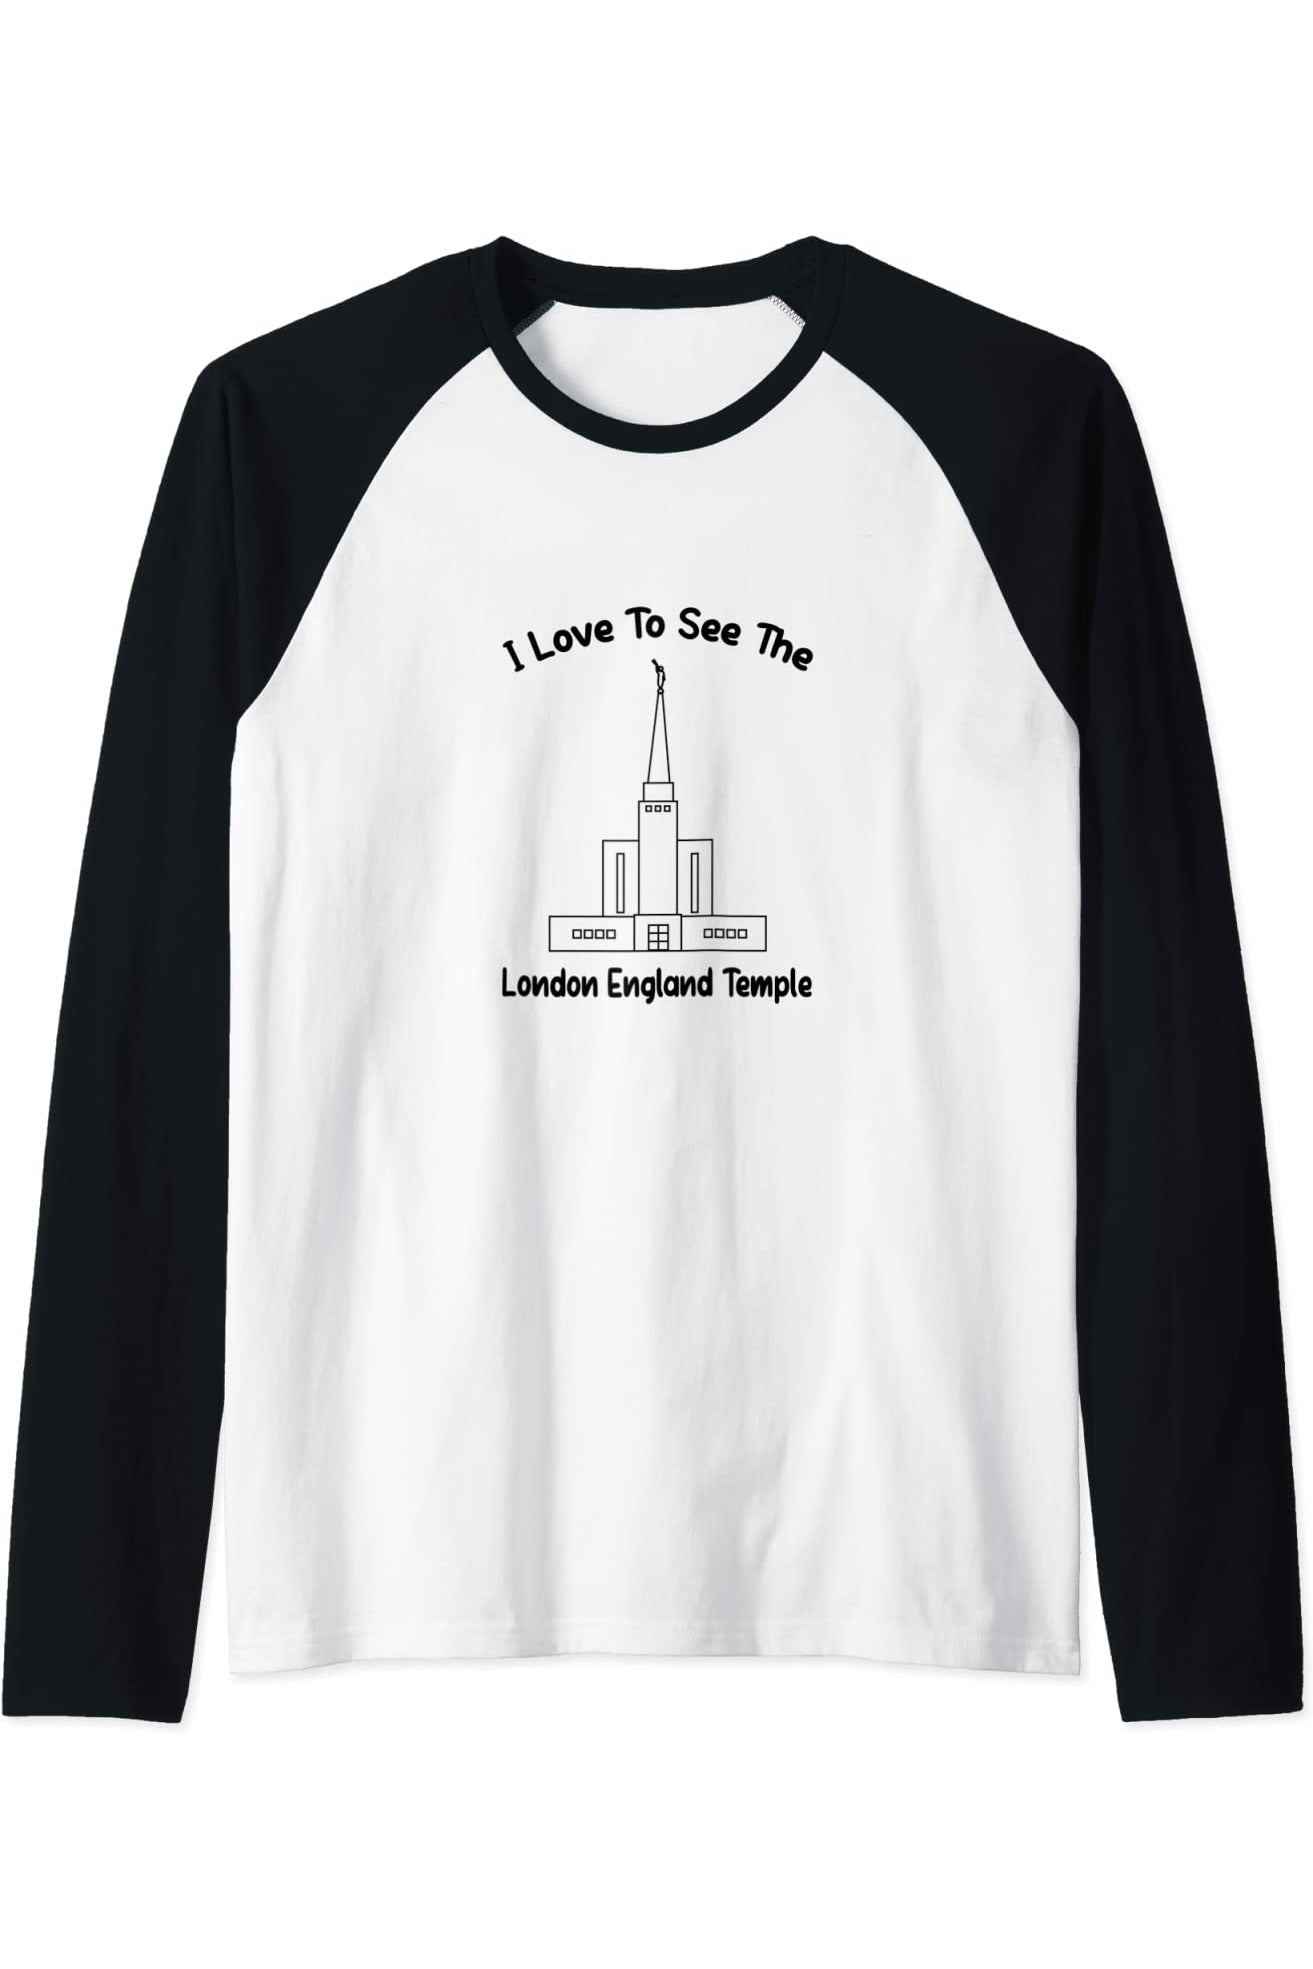 London England Temple I love to see my Tempel, primary Raglan T-Shirt